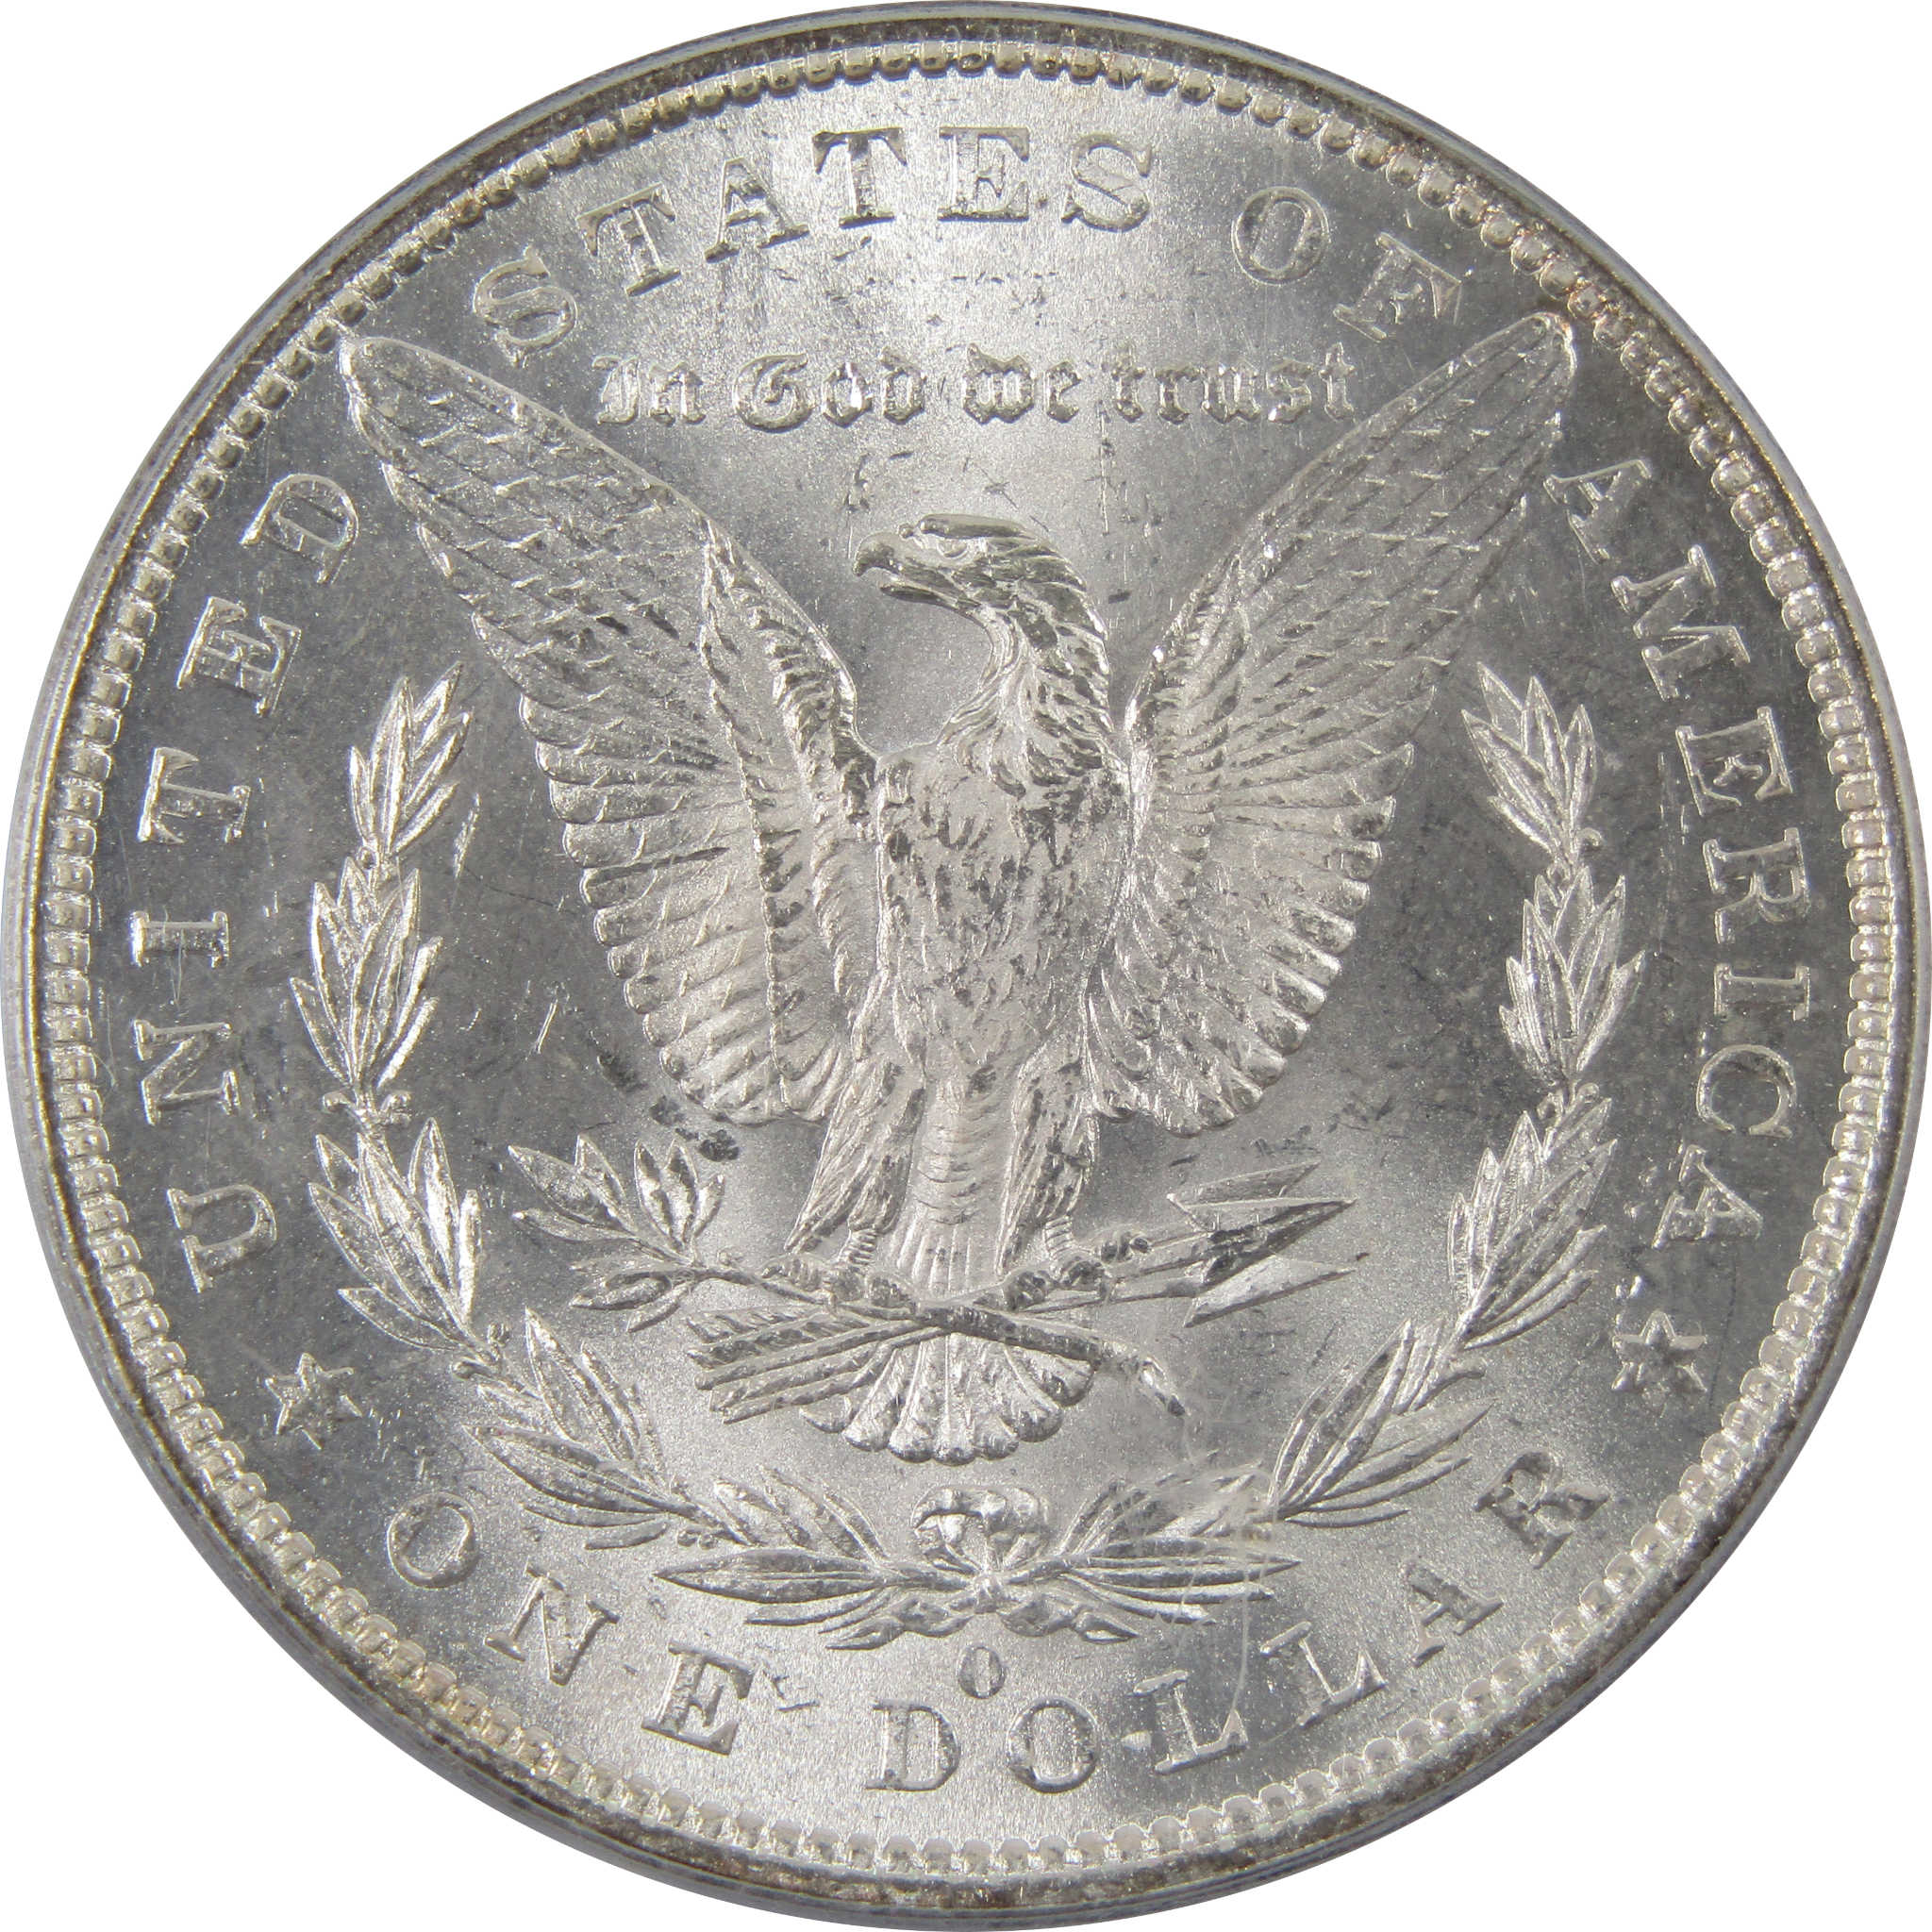 1879 O Morgan Dollar MS 63 PCGS 90% Silver $1 Uncirculated SKU:I9376 - Morgan coin - Morgan silver dollar - Morgan silver dollar for sale - Profile Coins &amp; Collectibles